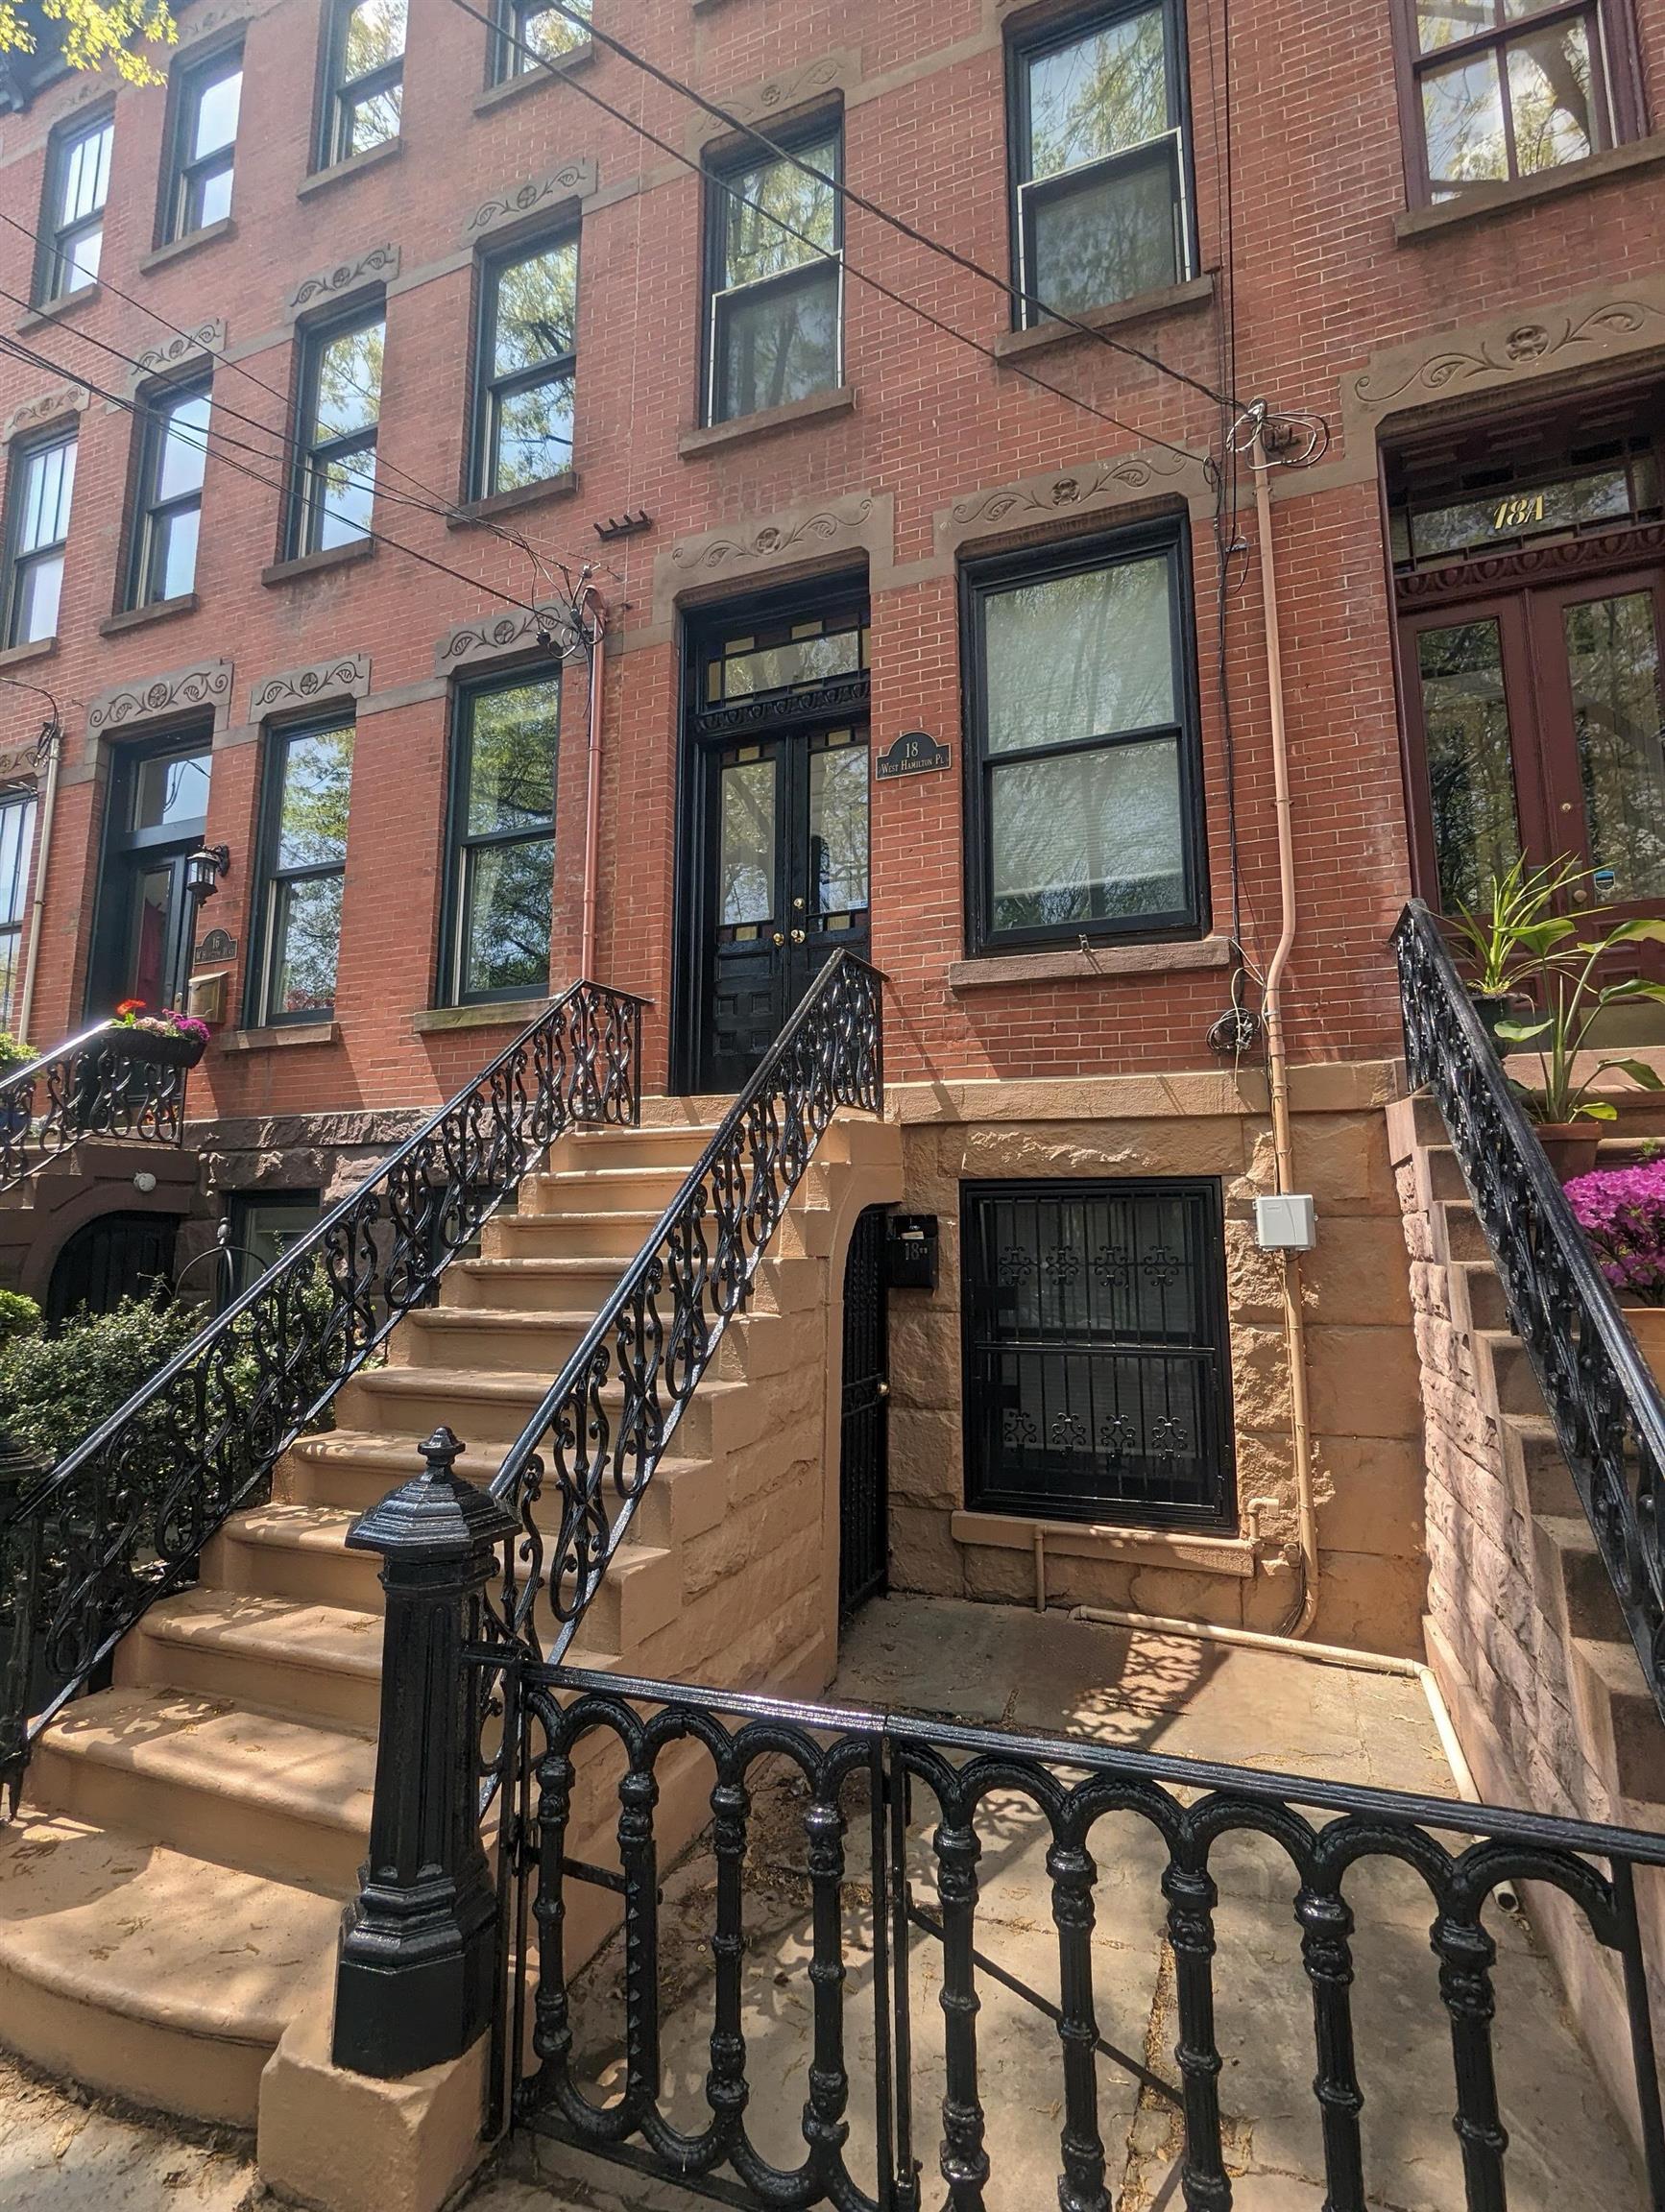 # 240008018 - For Rent in JERSEY CITY - Downtown NJ